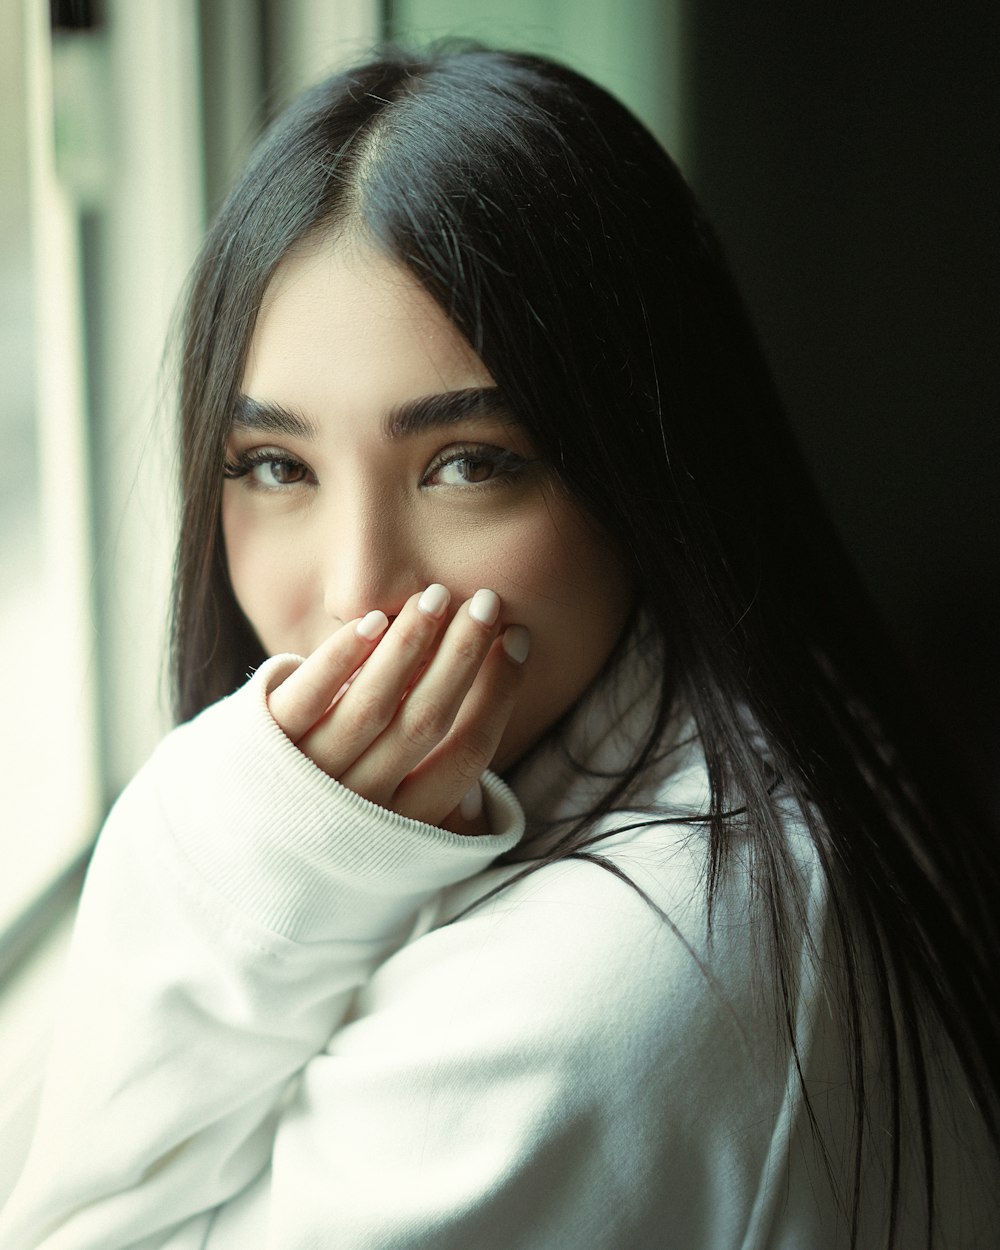 a woman with long black hair is looking out a window